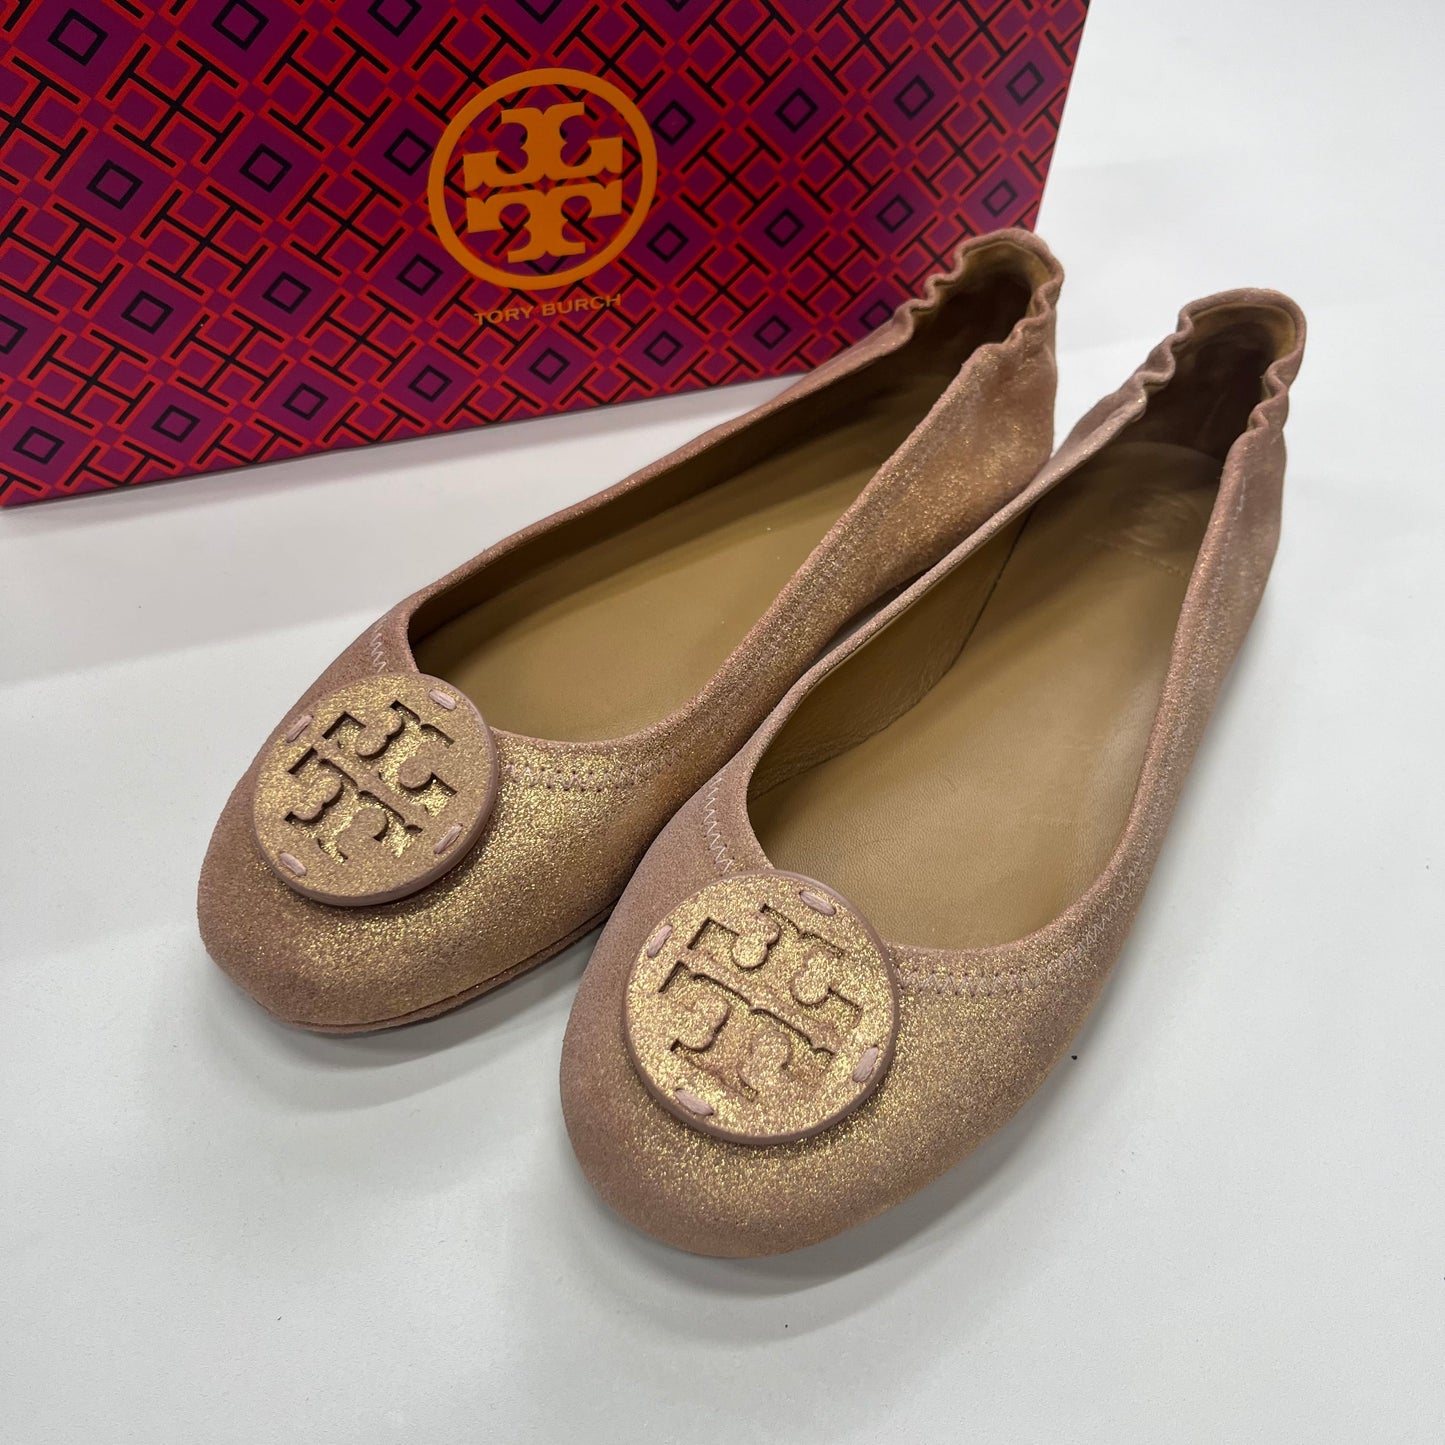 Multi-colored Sandals Flats Tory Burch, Size 9.5